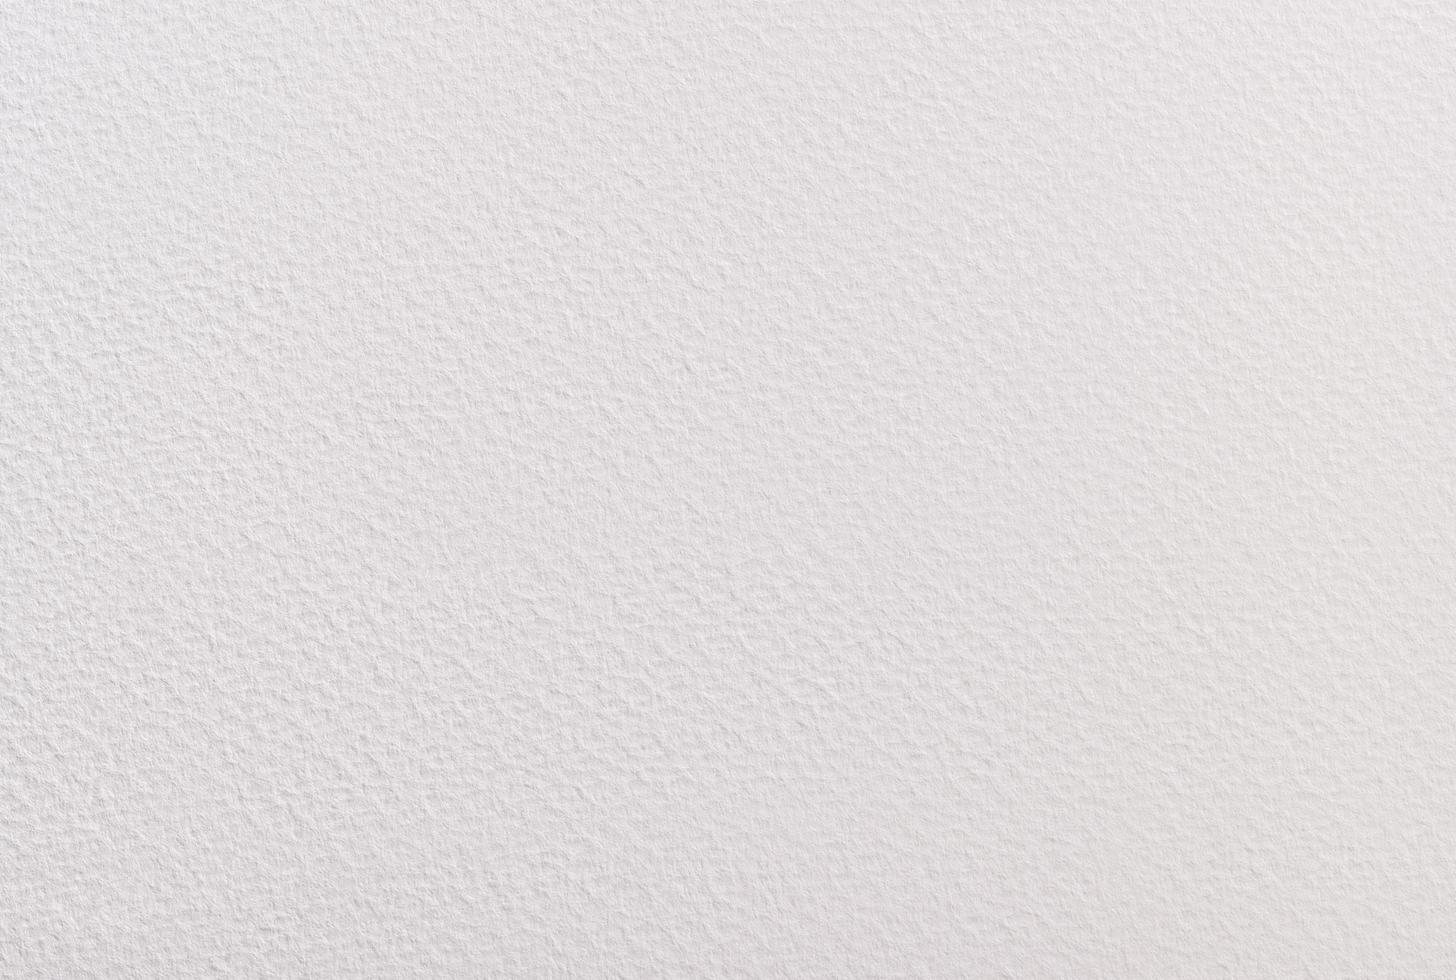 Paper texture. White watercolor paper texture background photo